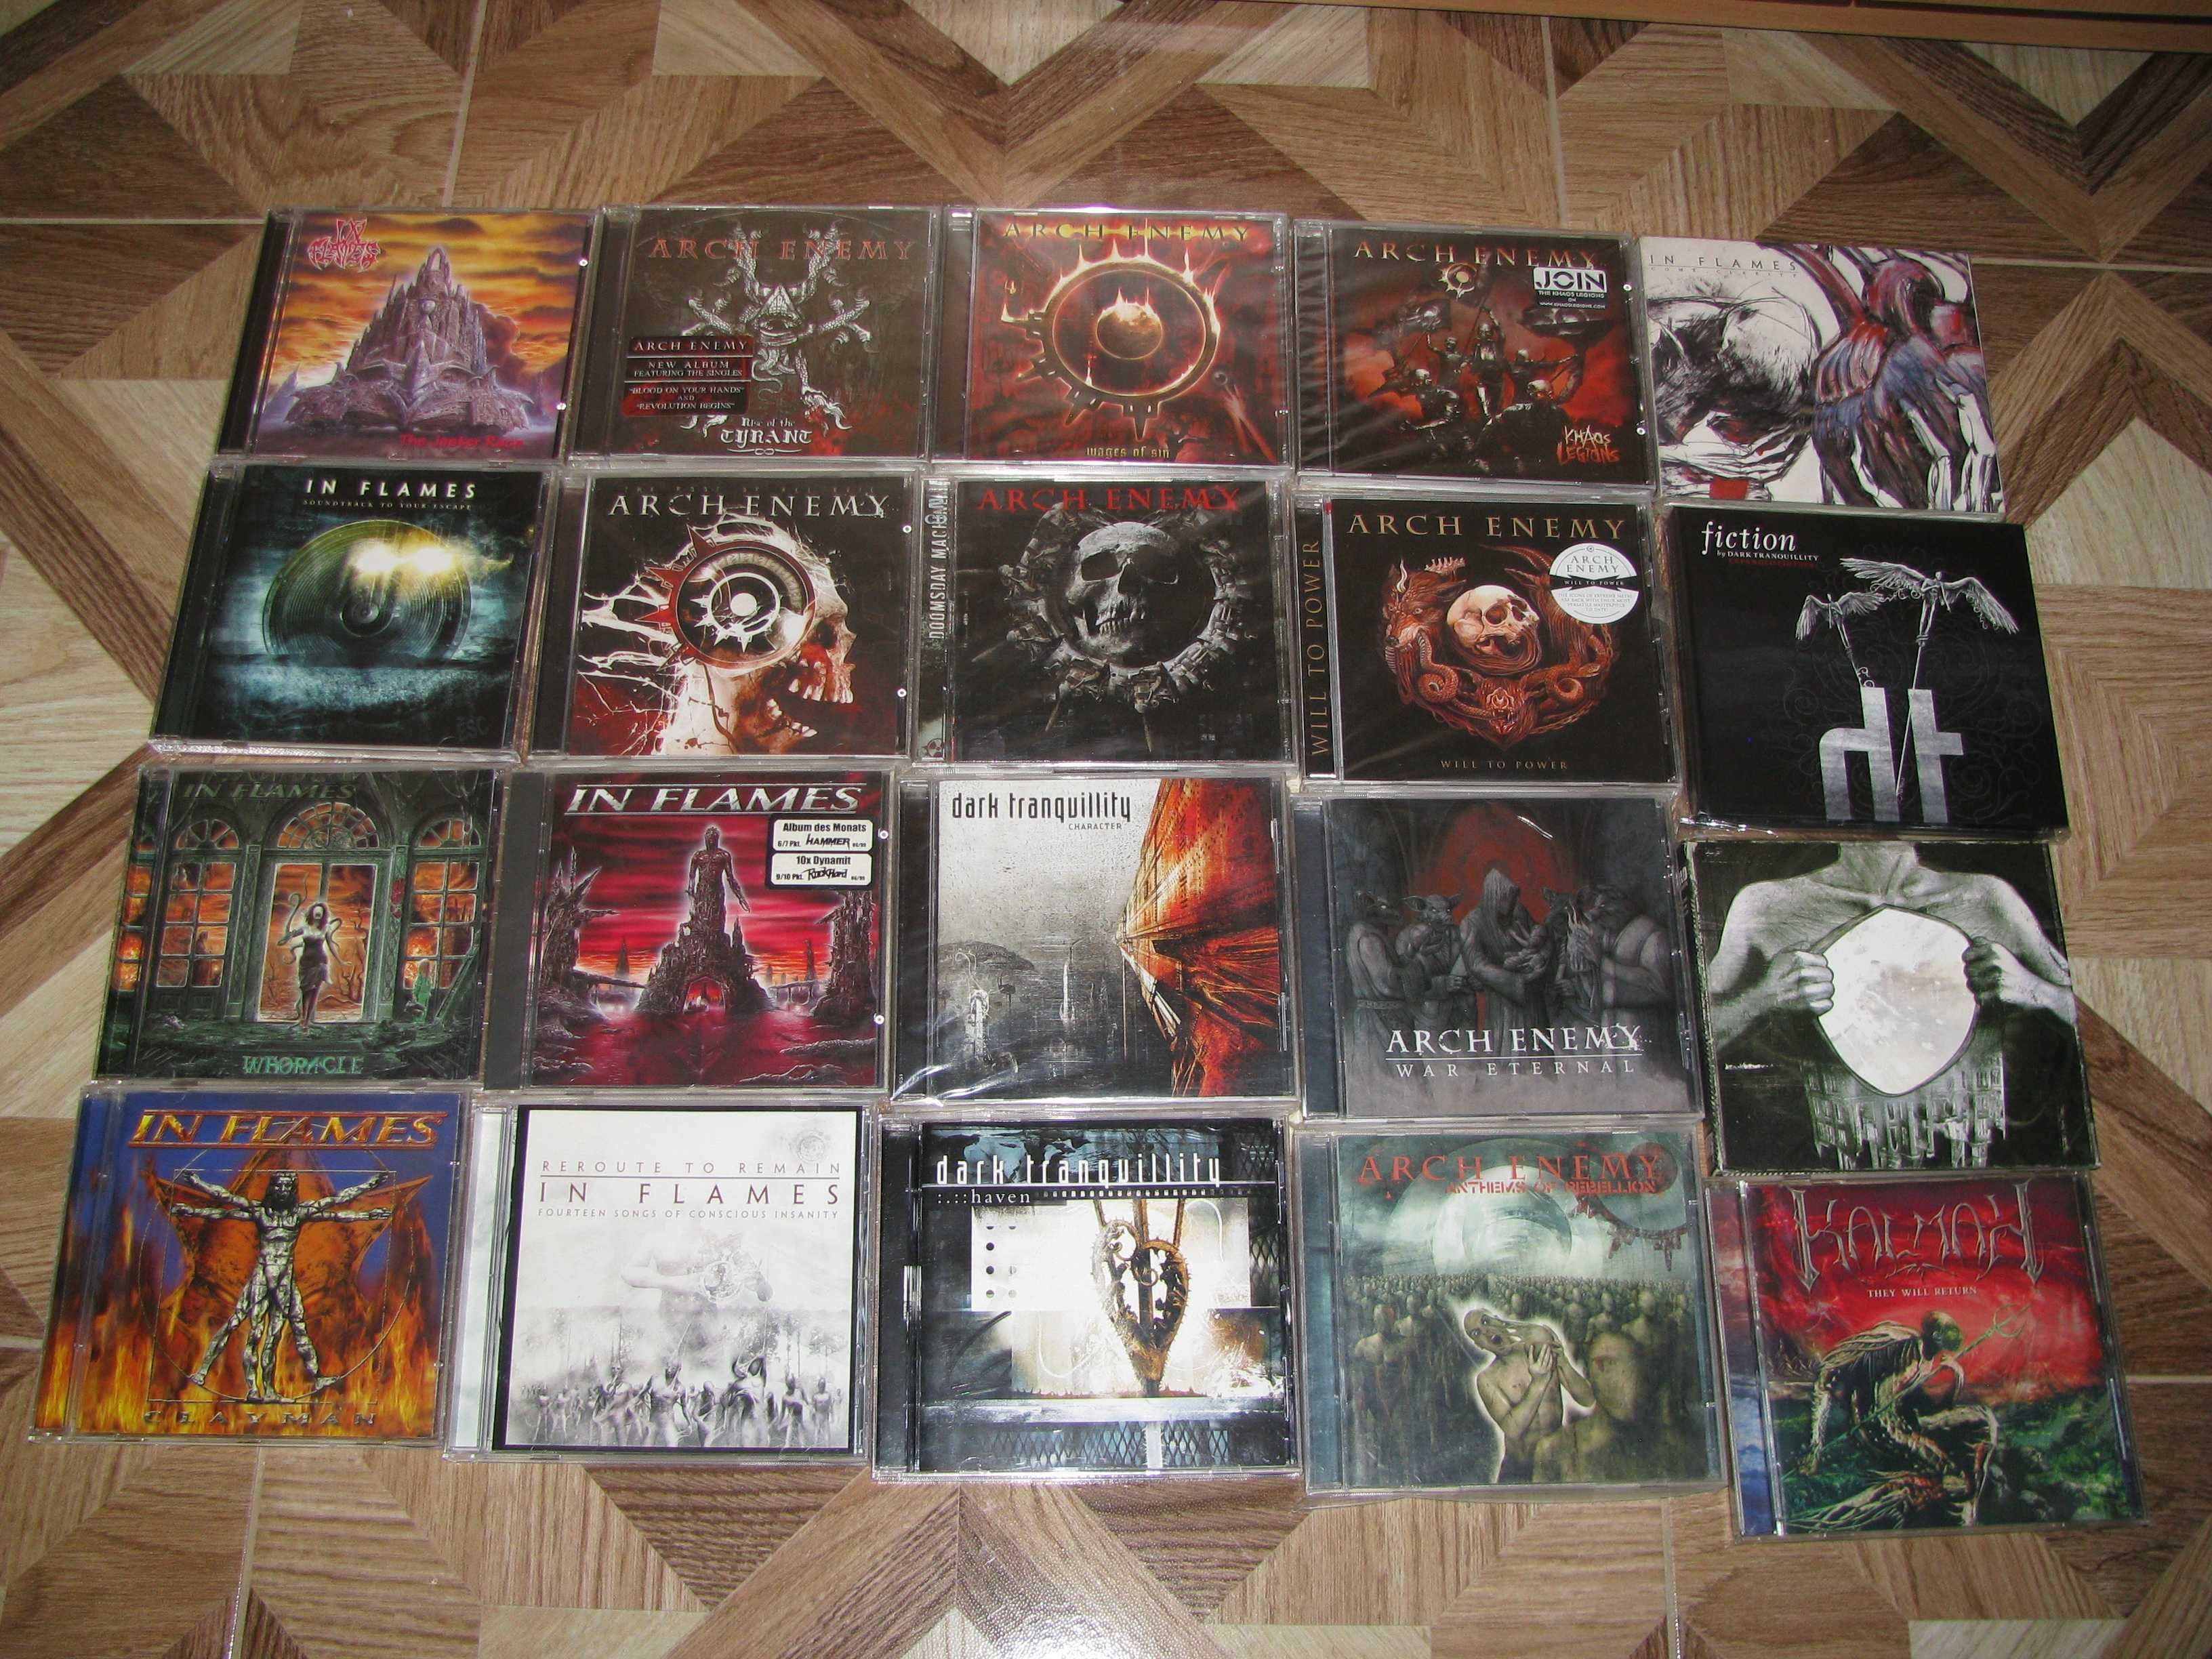 Pyogenesis, Carcass, Bessech, Paradise Lost, My Dying Bride, Amorphis